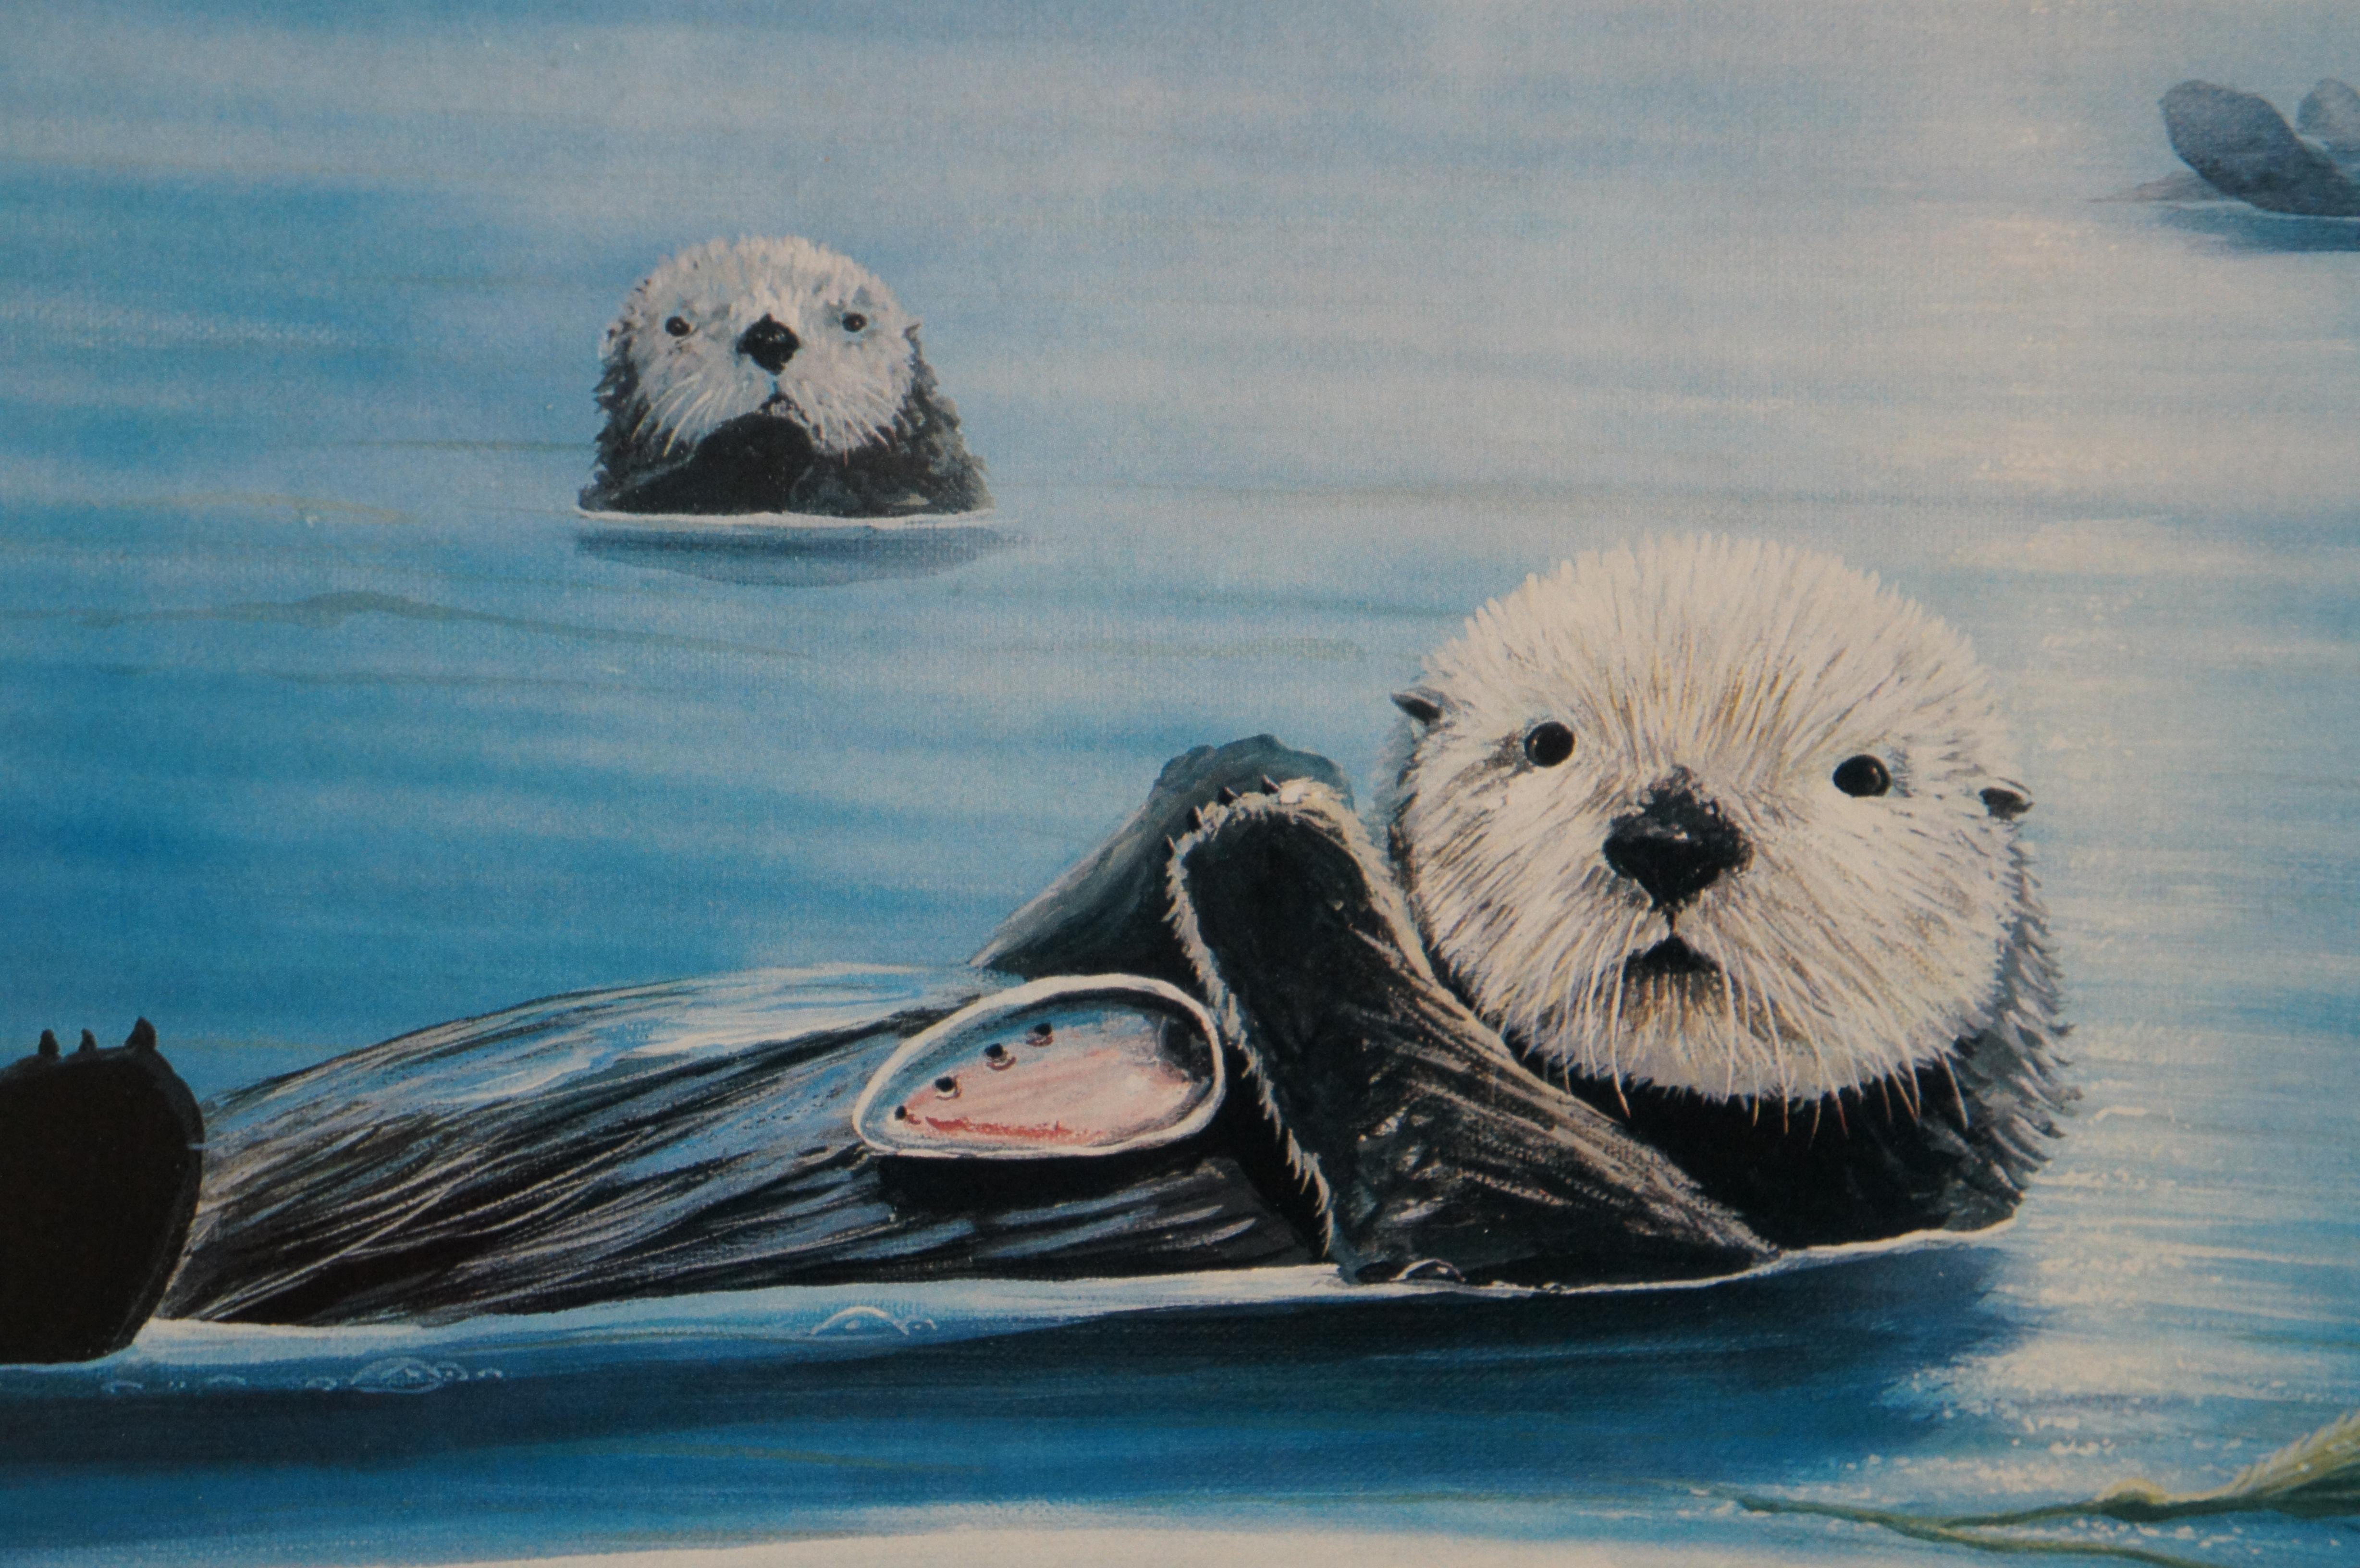 2 1990s Robert Wyland Signed Lithograph Prints Orca Journey Sea Otters Seascape For Sale 3